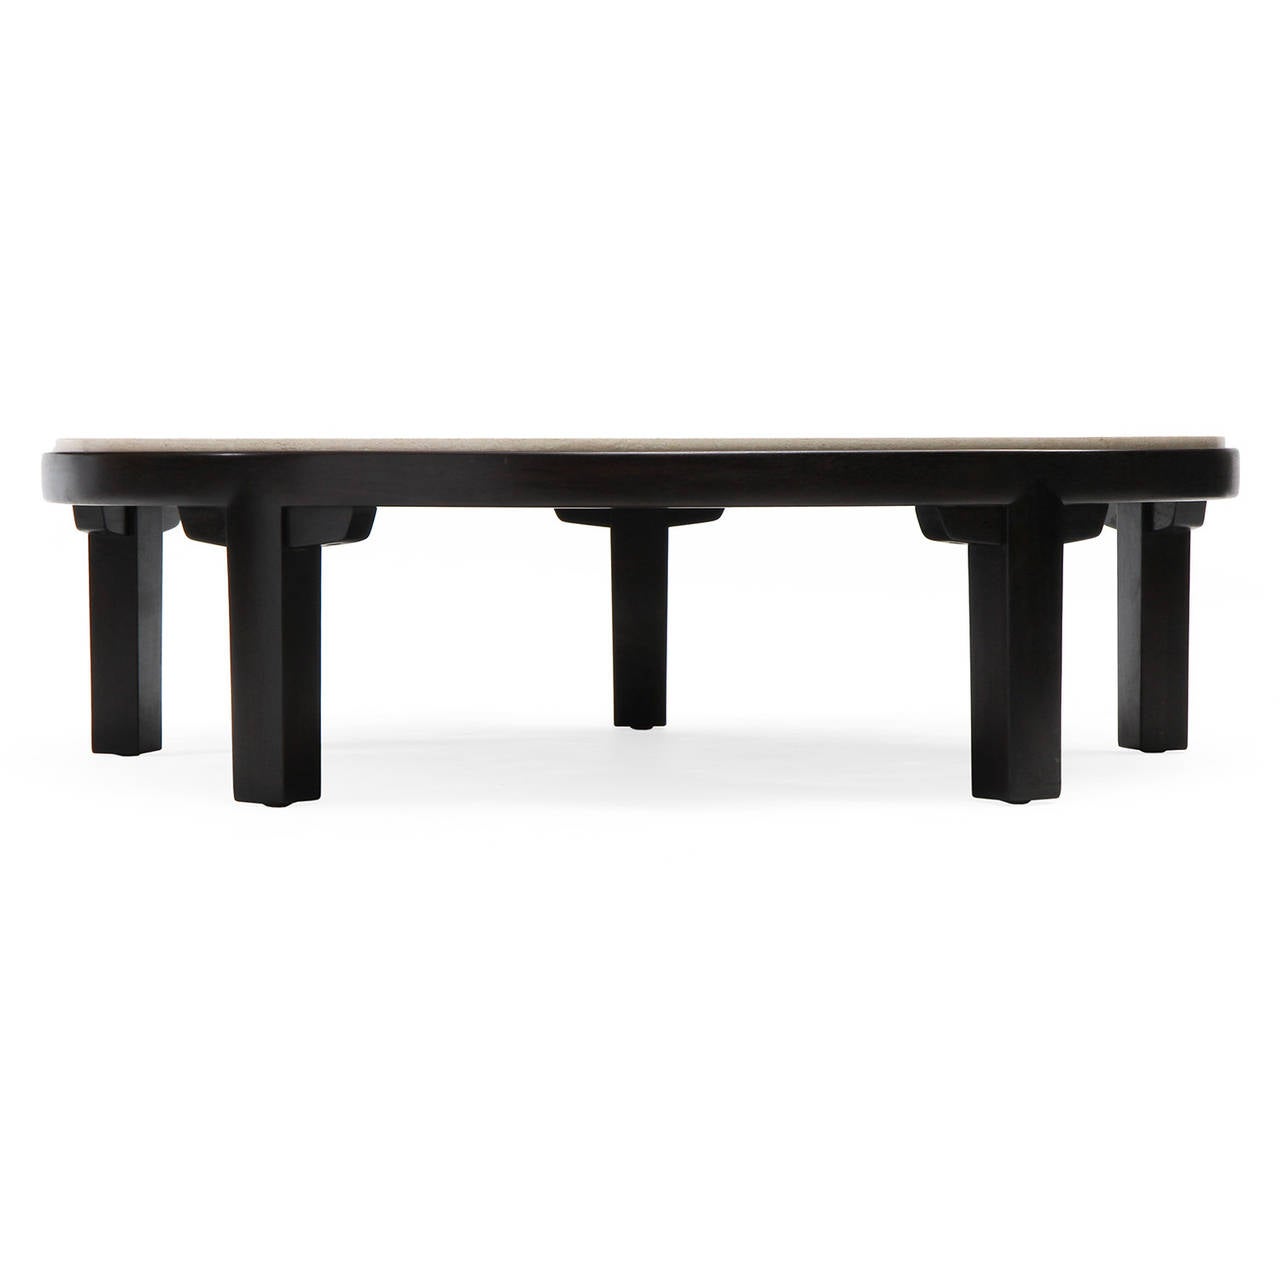 Mid-20th Century Travertine Low Table by Edward Wormley